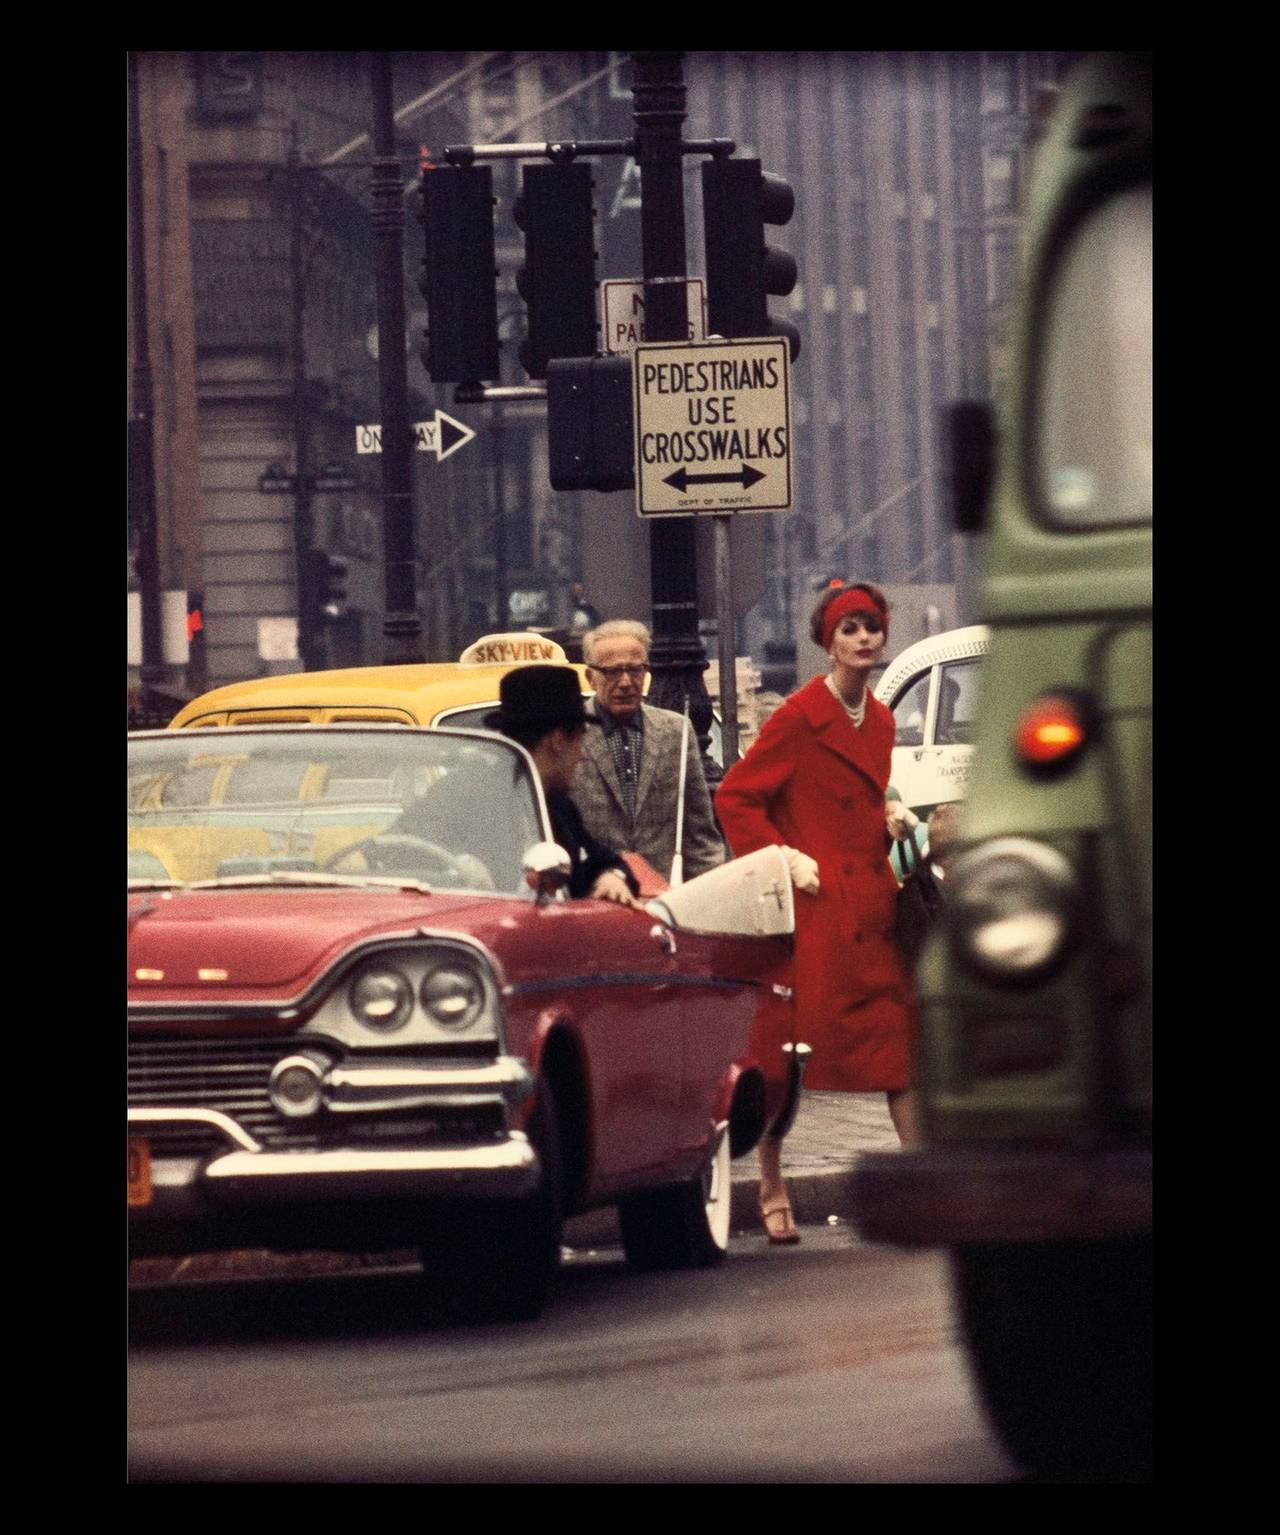 William Klein Color Photograph – Anne St. Marie + Cruiser in Traffic, NY (Vogue)